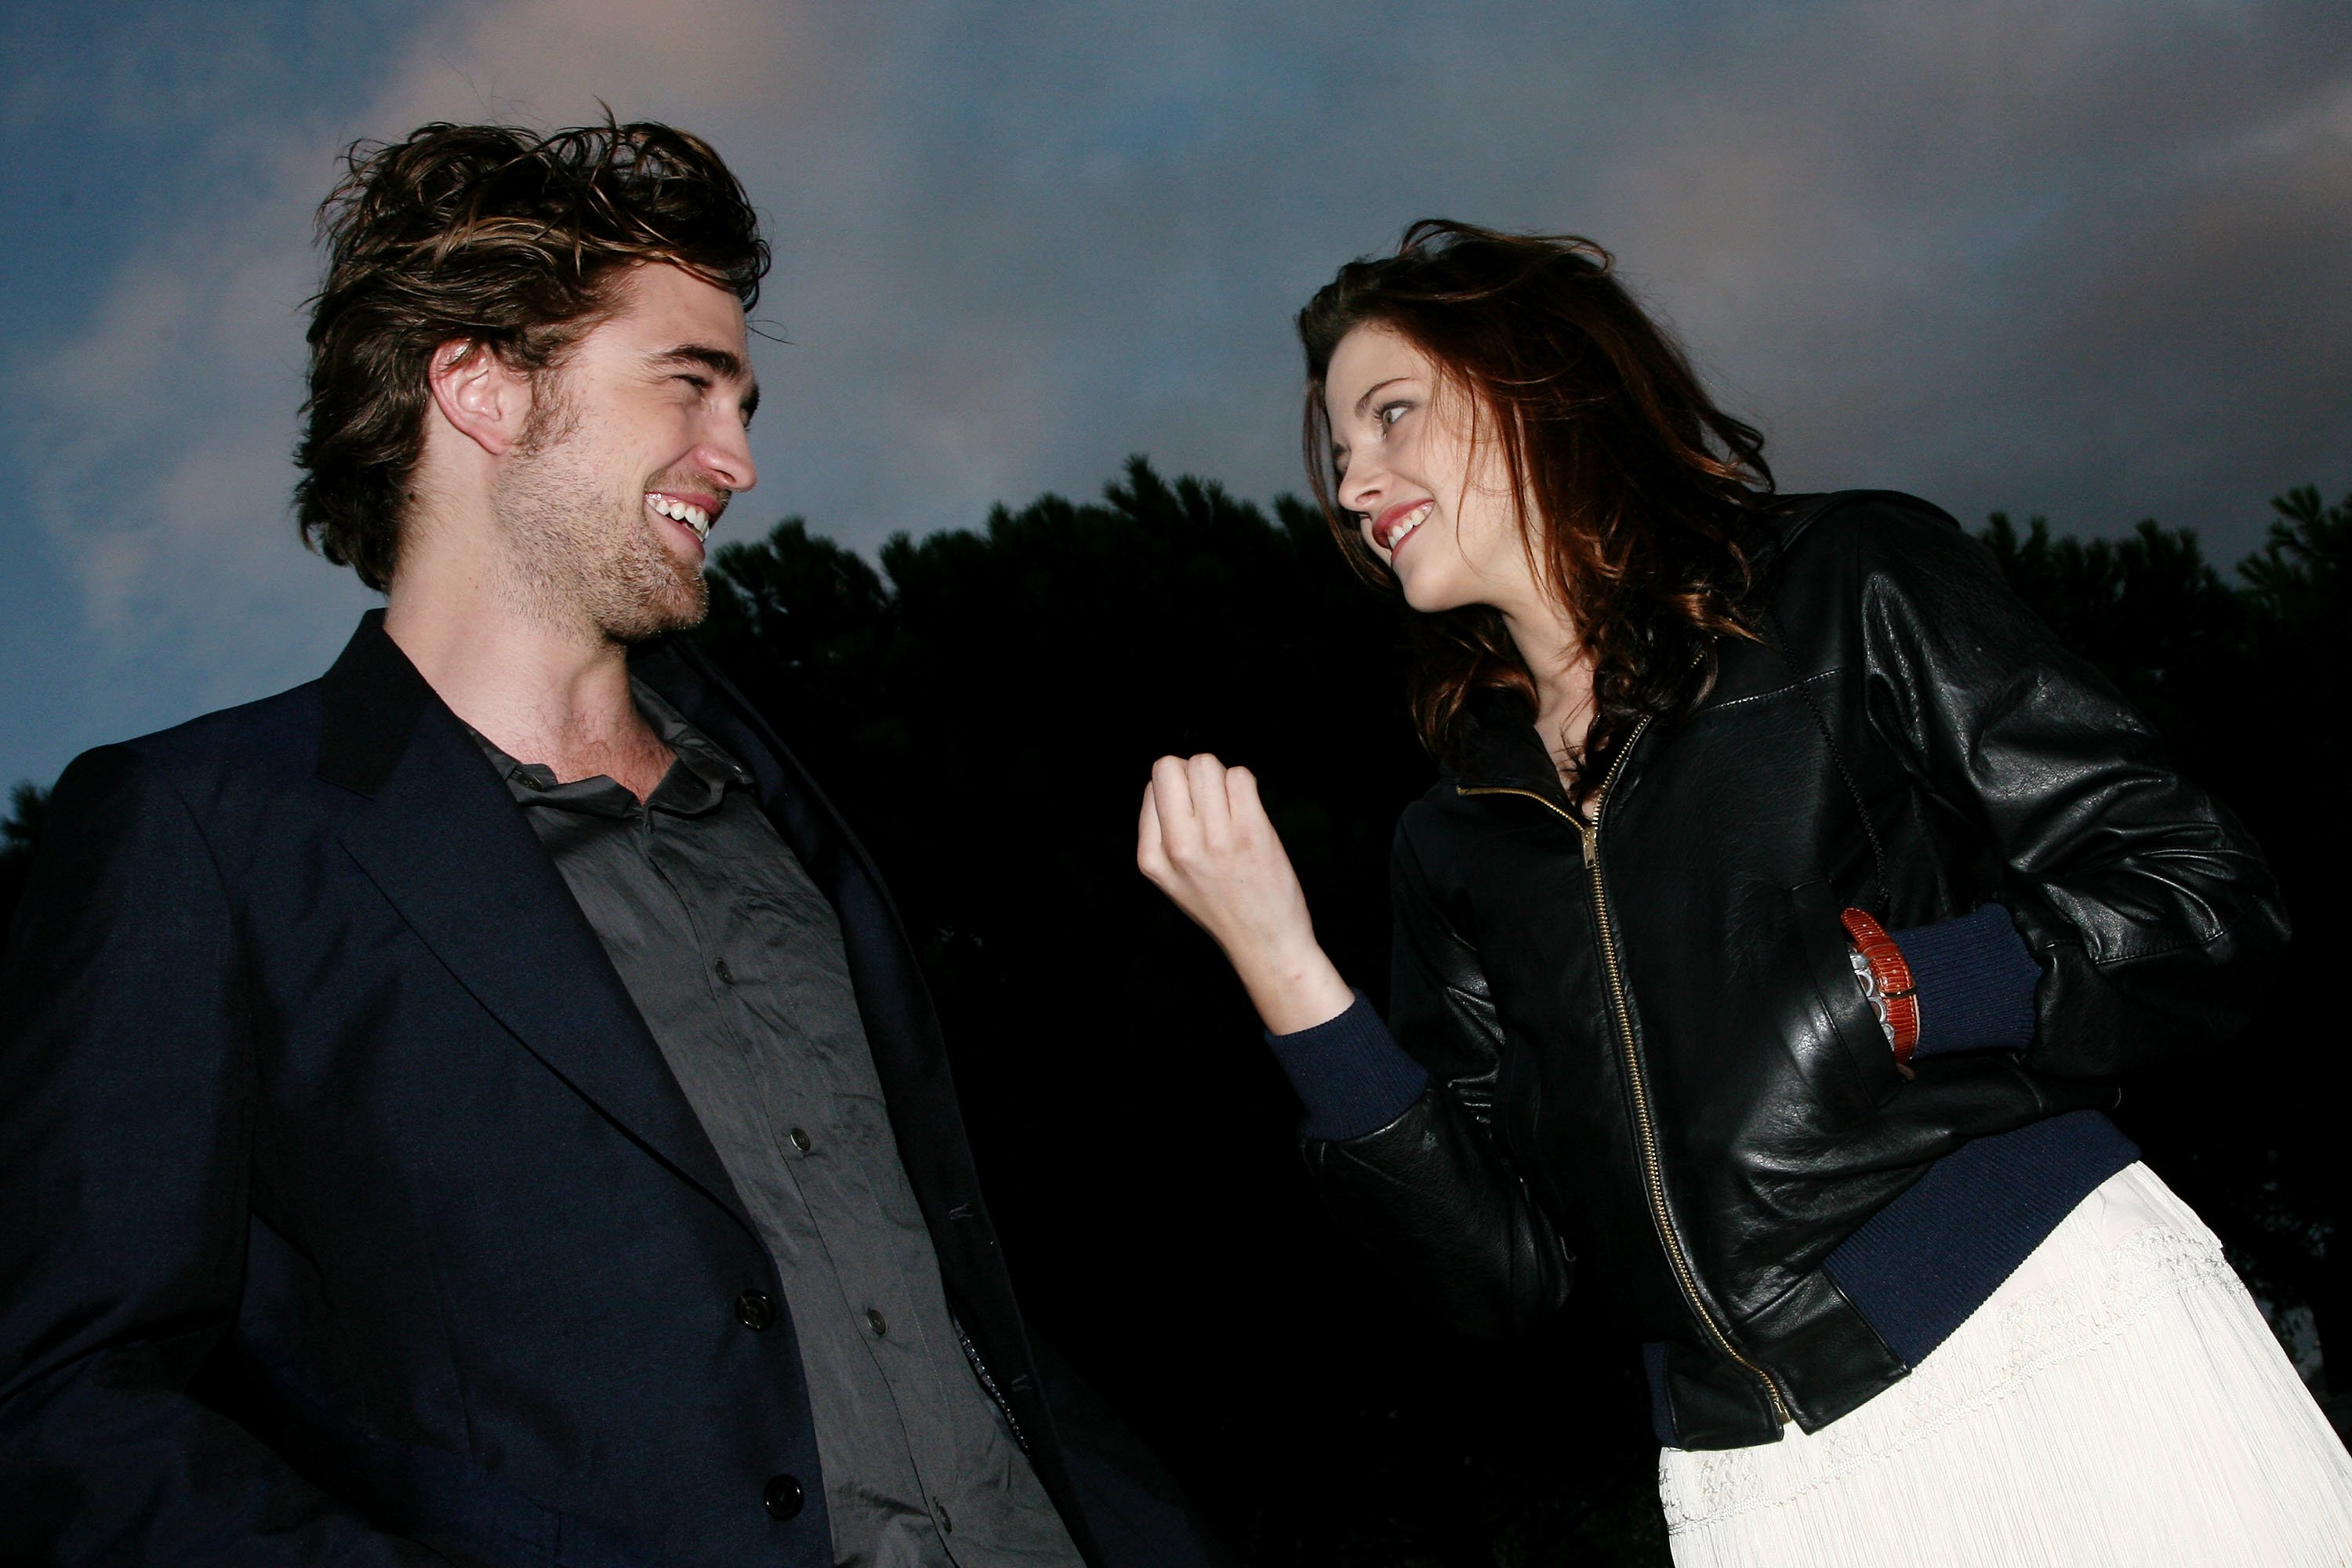 Kristen Stewart and Robert Pattinson Could Star Together in a New Film – but It Definitely Won’t Be ‘Twilight’